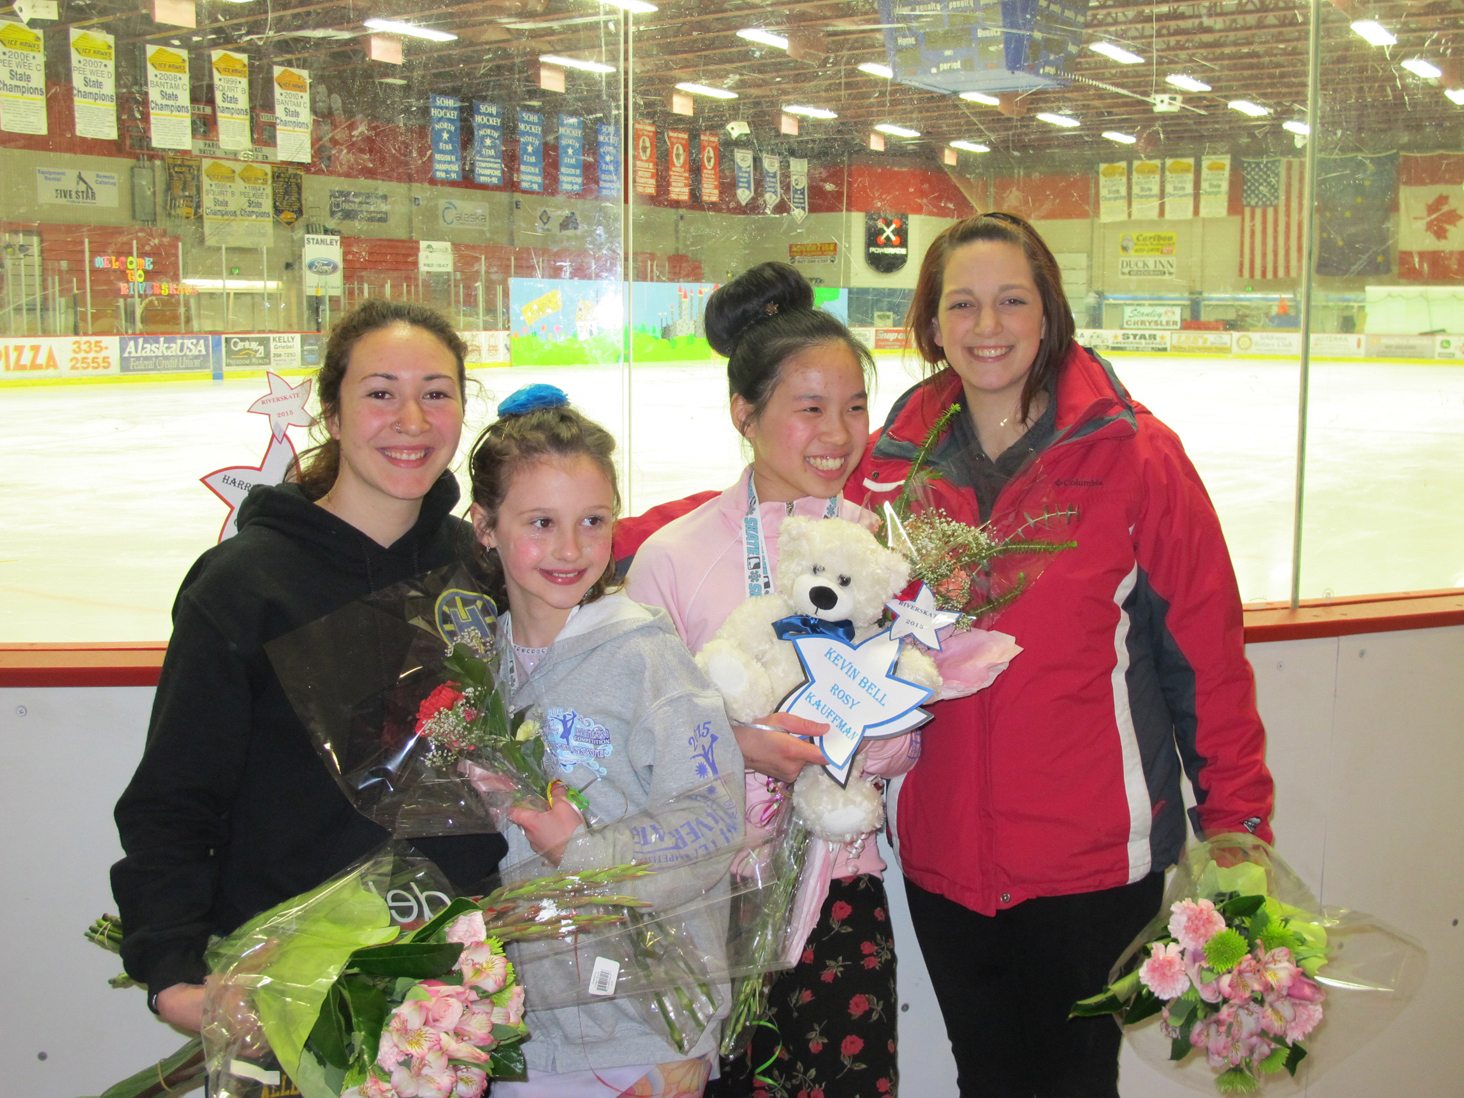 Participants in the Kevin Bell Arena’s We Skate program pose for a photo during the Riverskate competition in Soldotna April 10-12. From left are Coach McKinzie Parker, Ireland Styvar, Rosy Koffman, and Coach Megan Magee.                              -Photo by Kiirsten Styvar